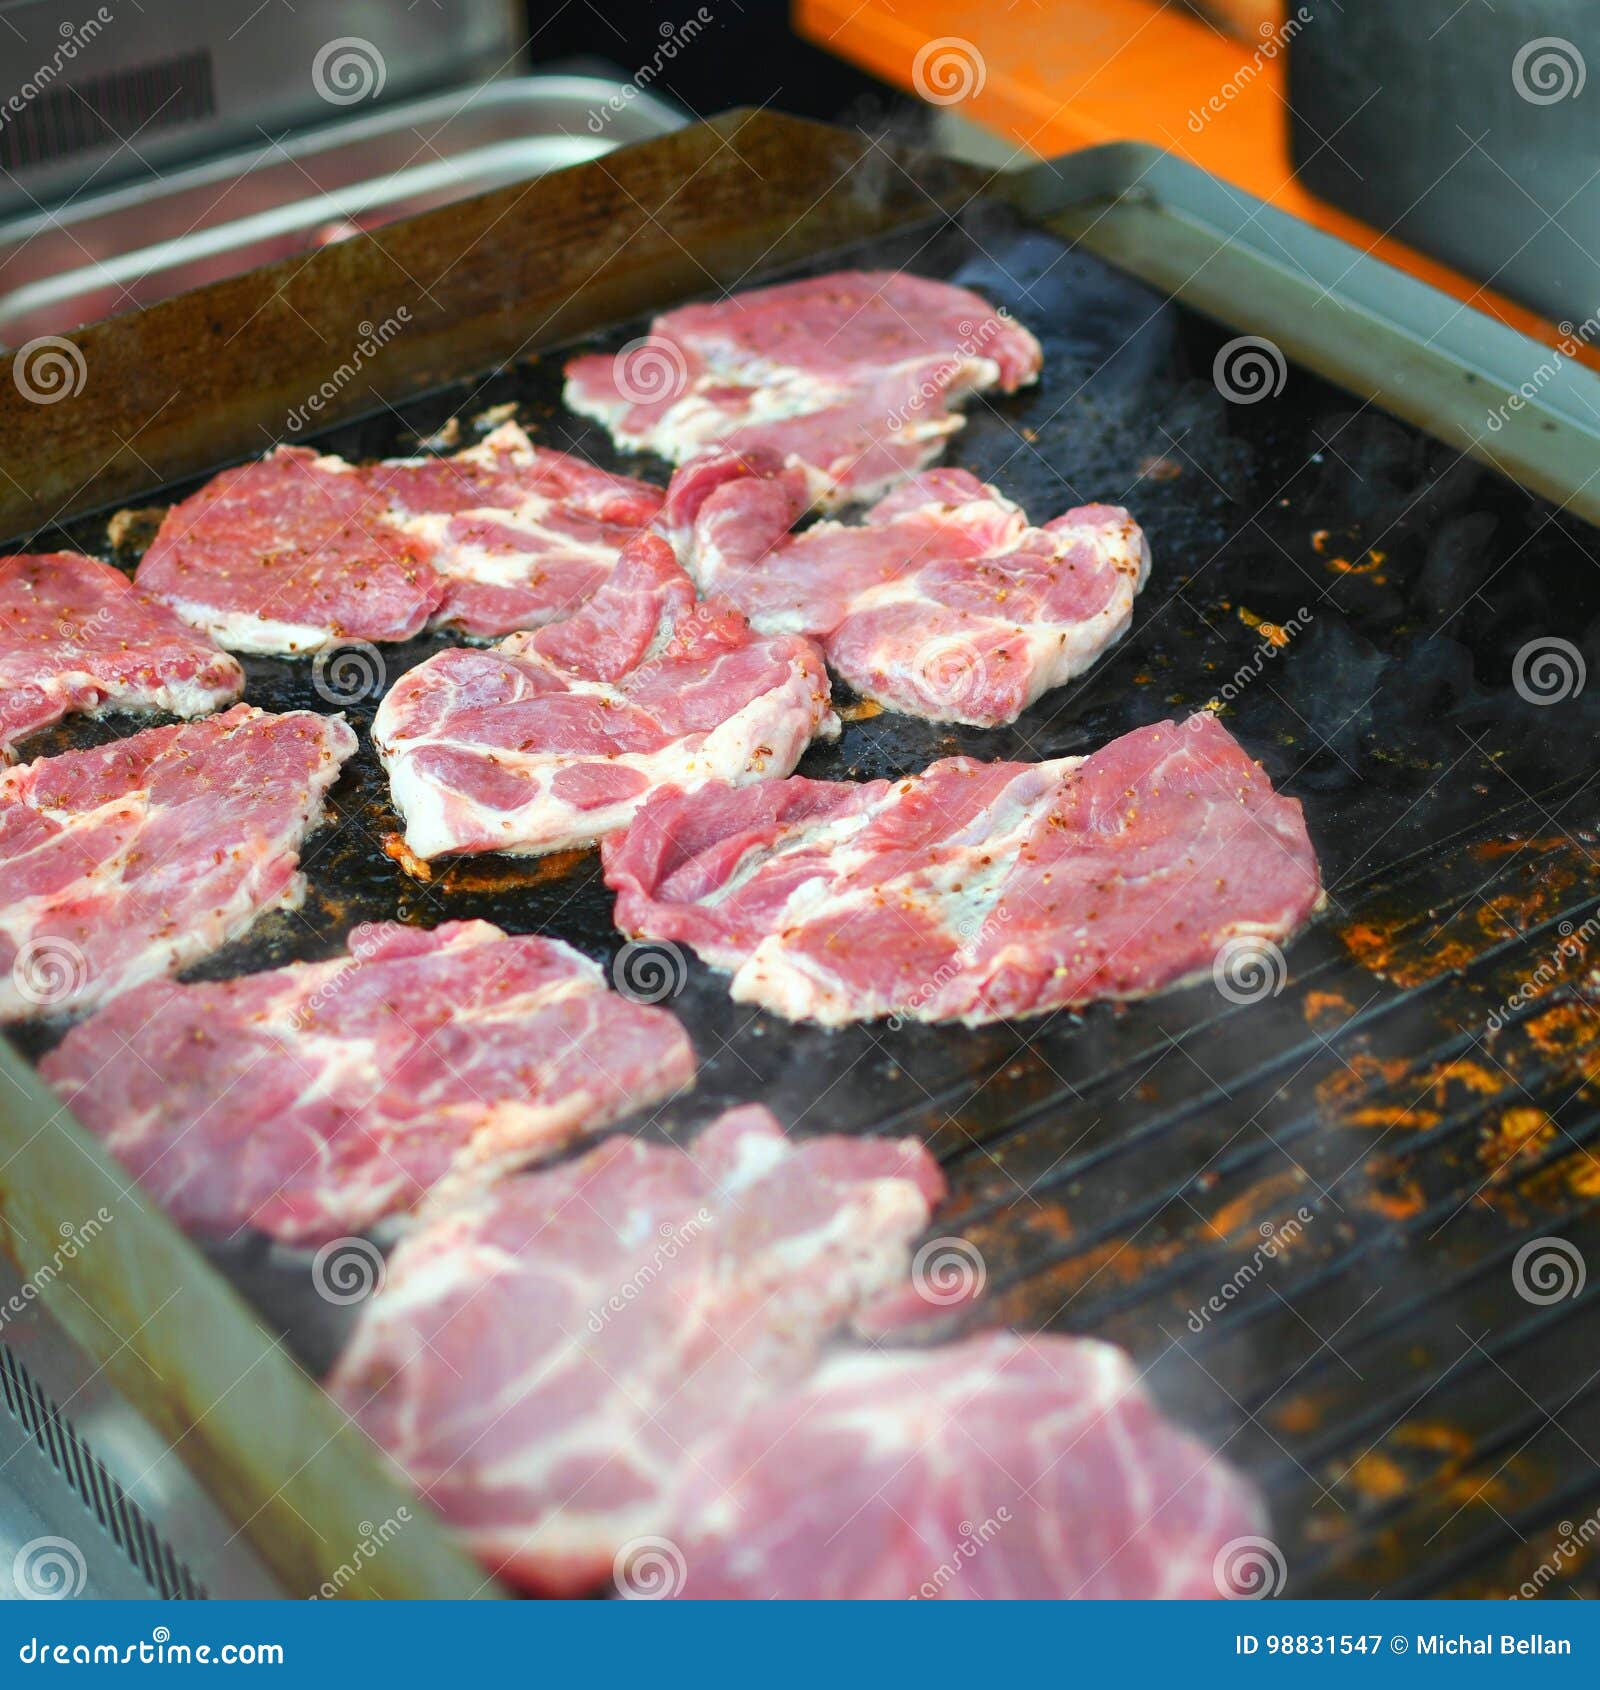 1 580 Beaf Meat Photos Free Royalty Free Stock Photos From Dreamstime